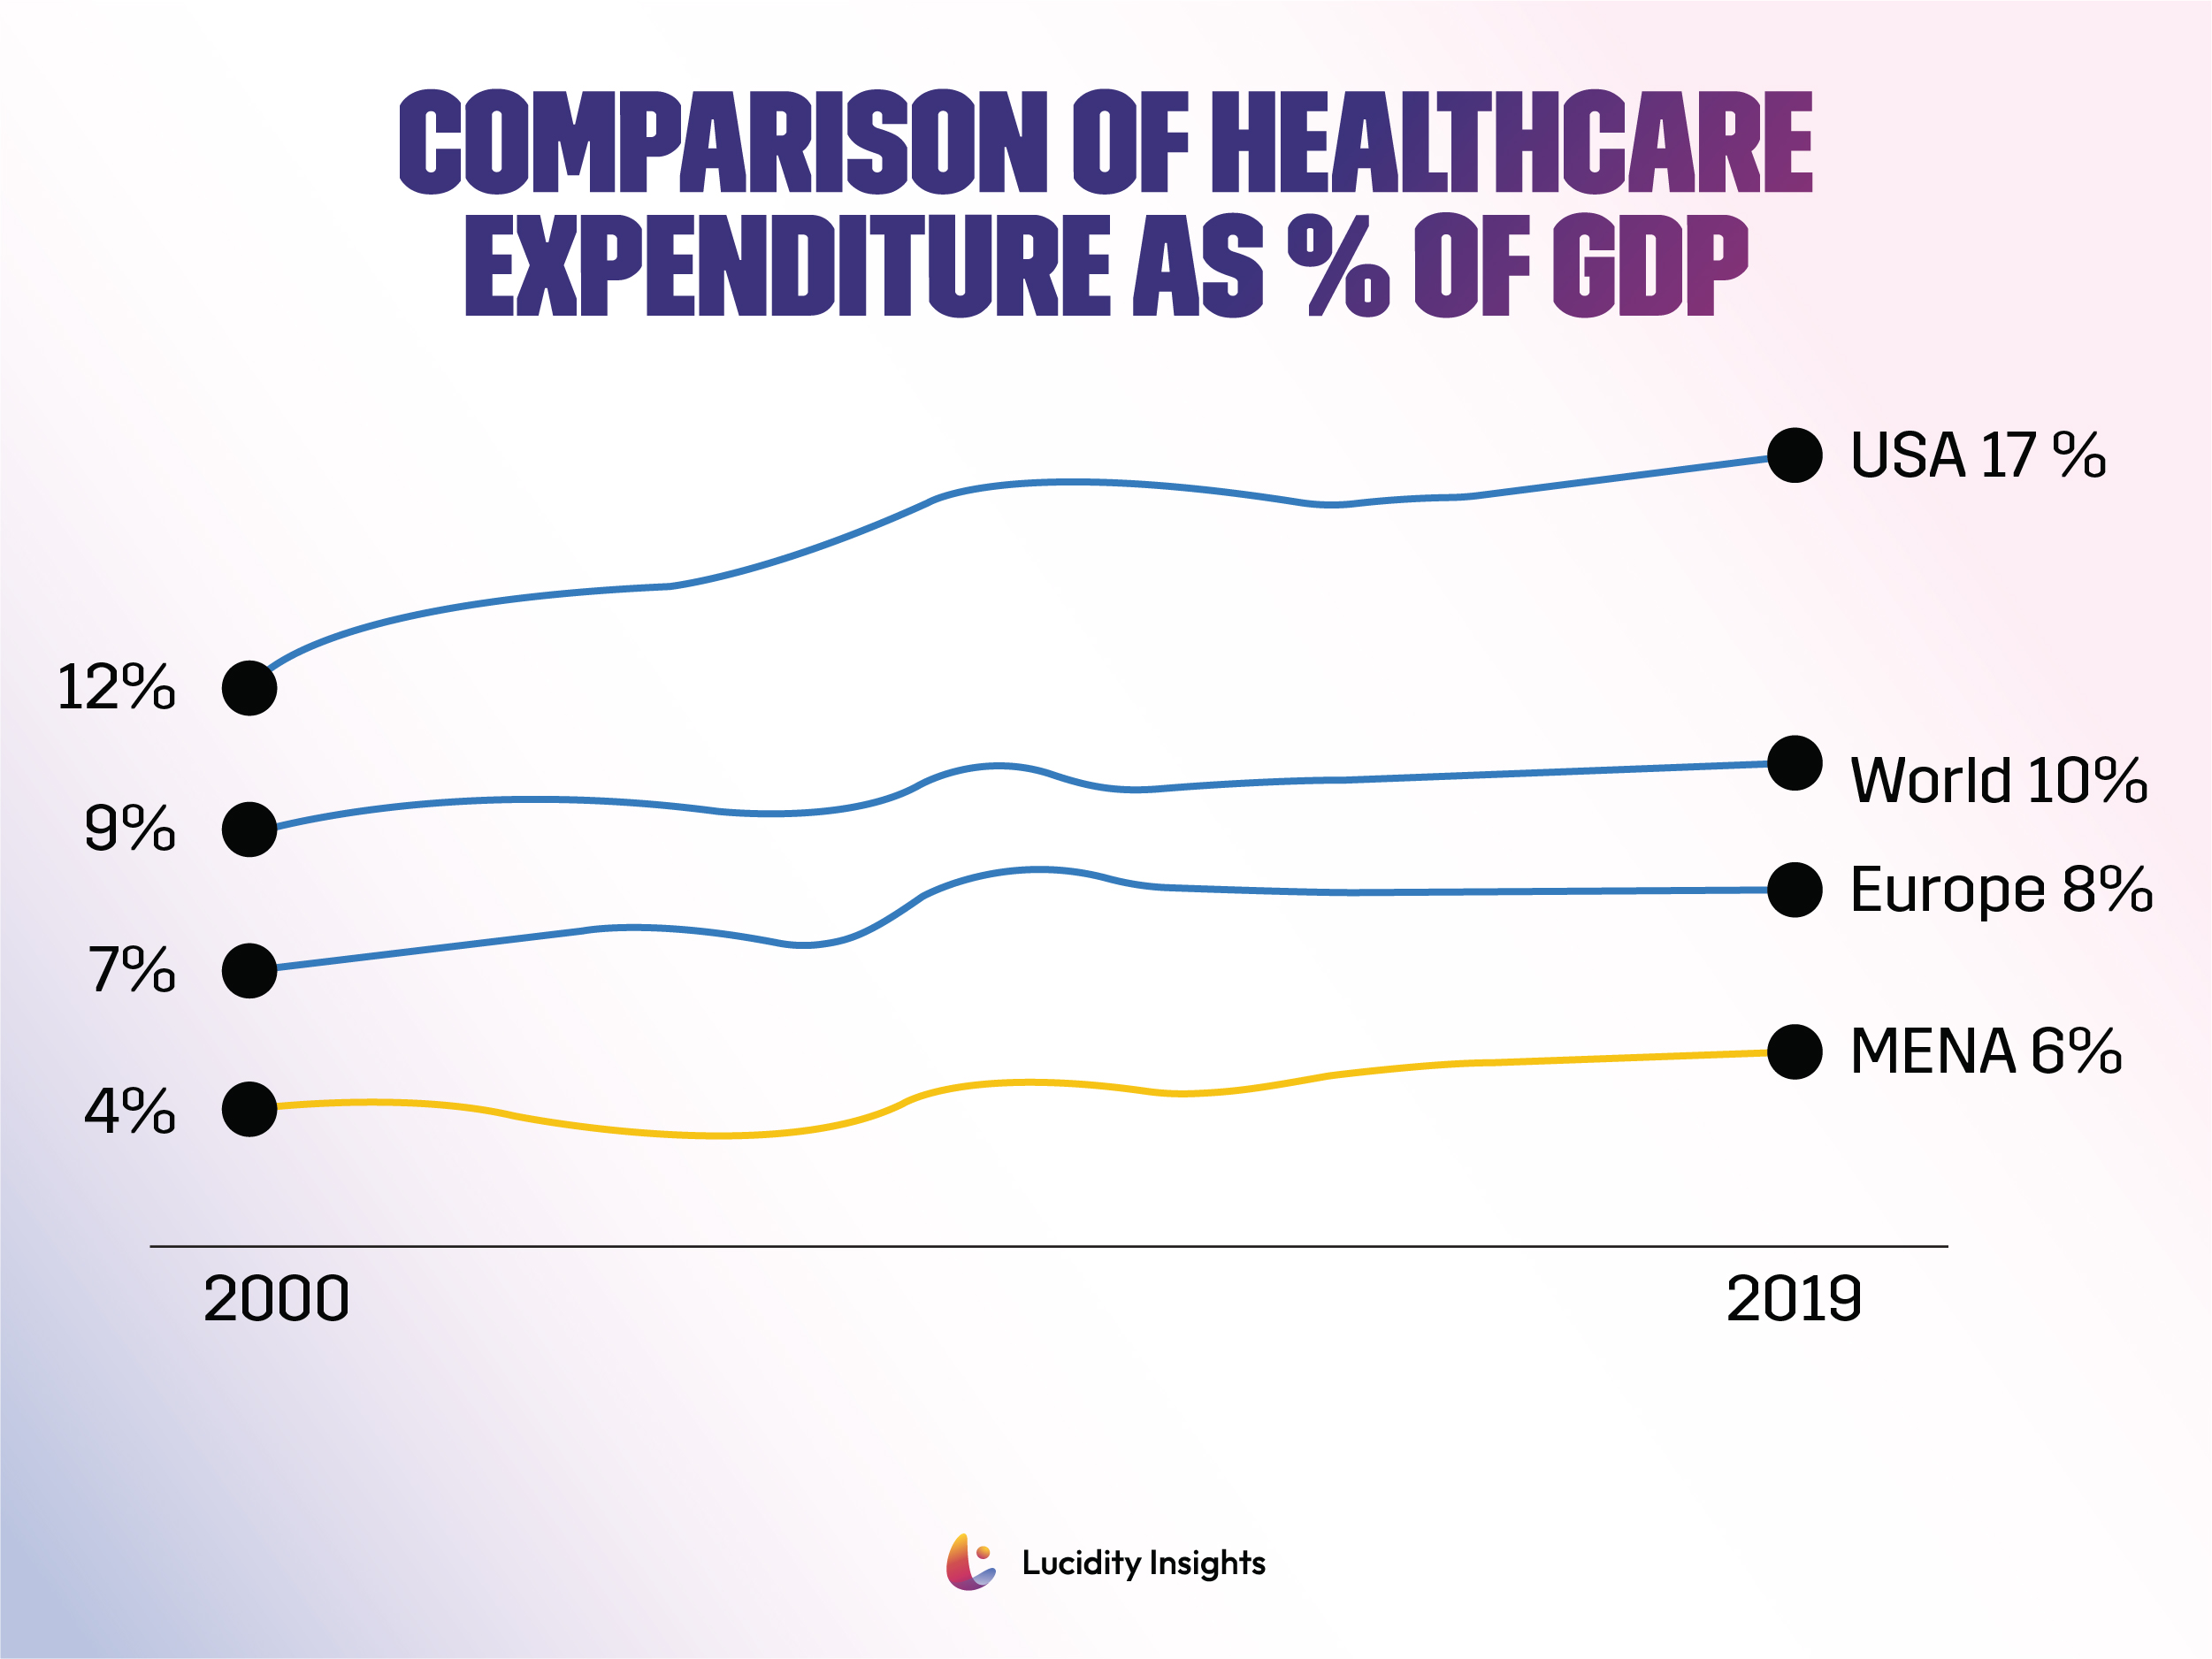 MENA Comparison of Healthcare Expenditure As % Of GDP